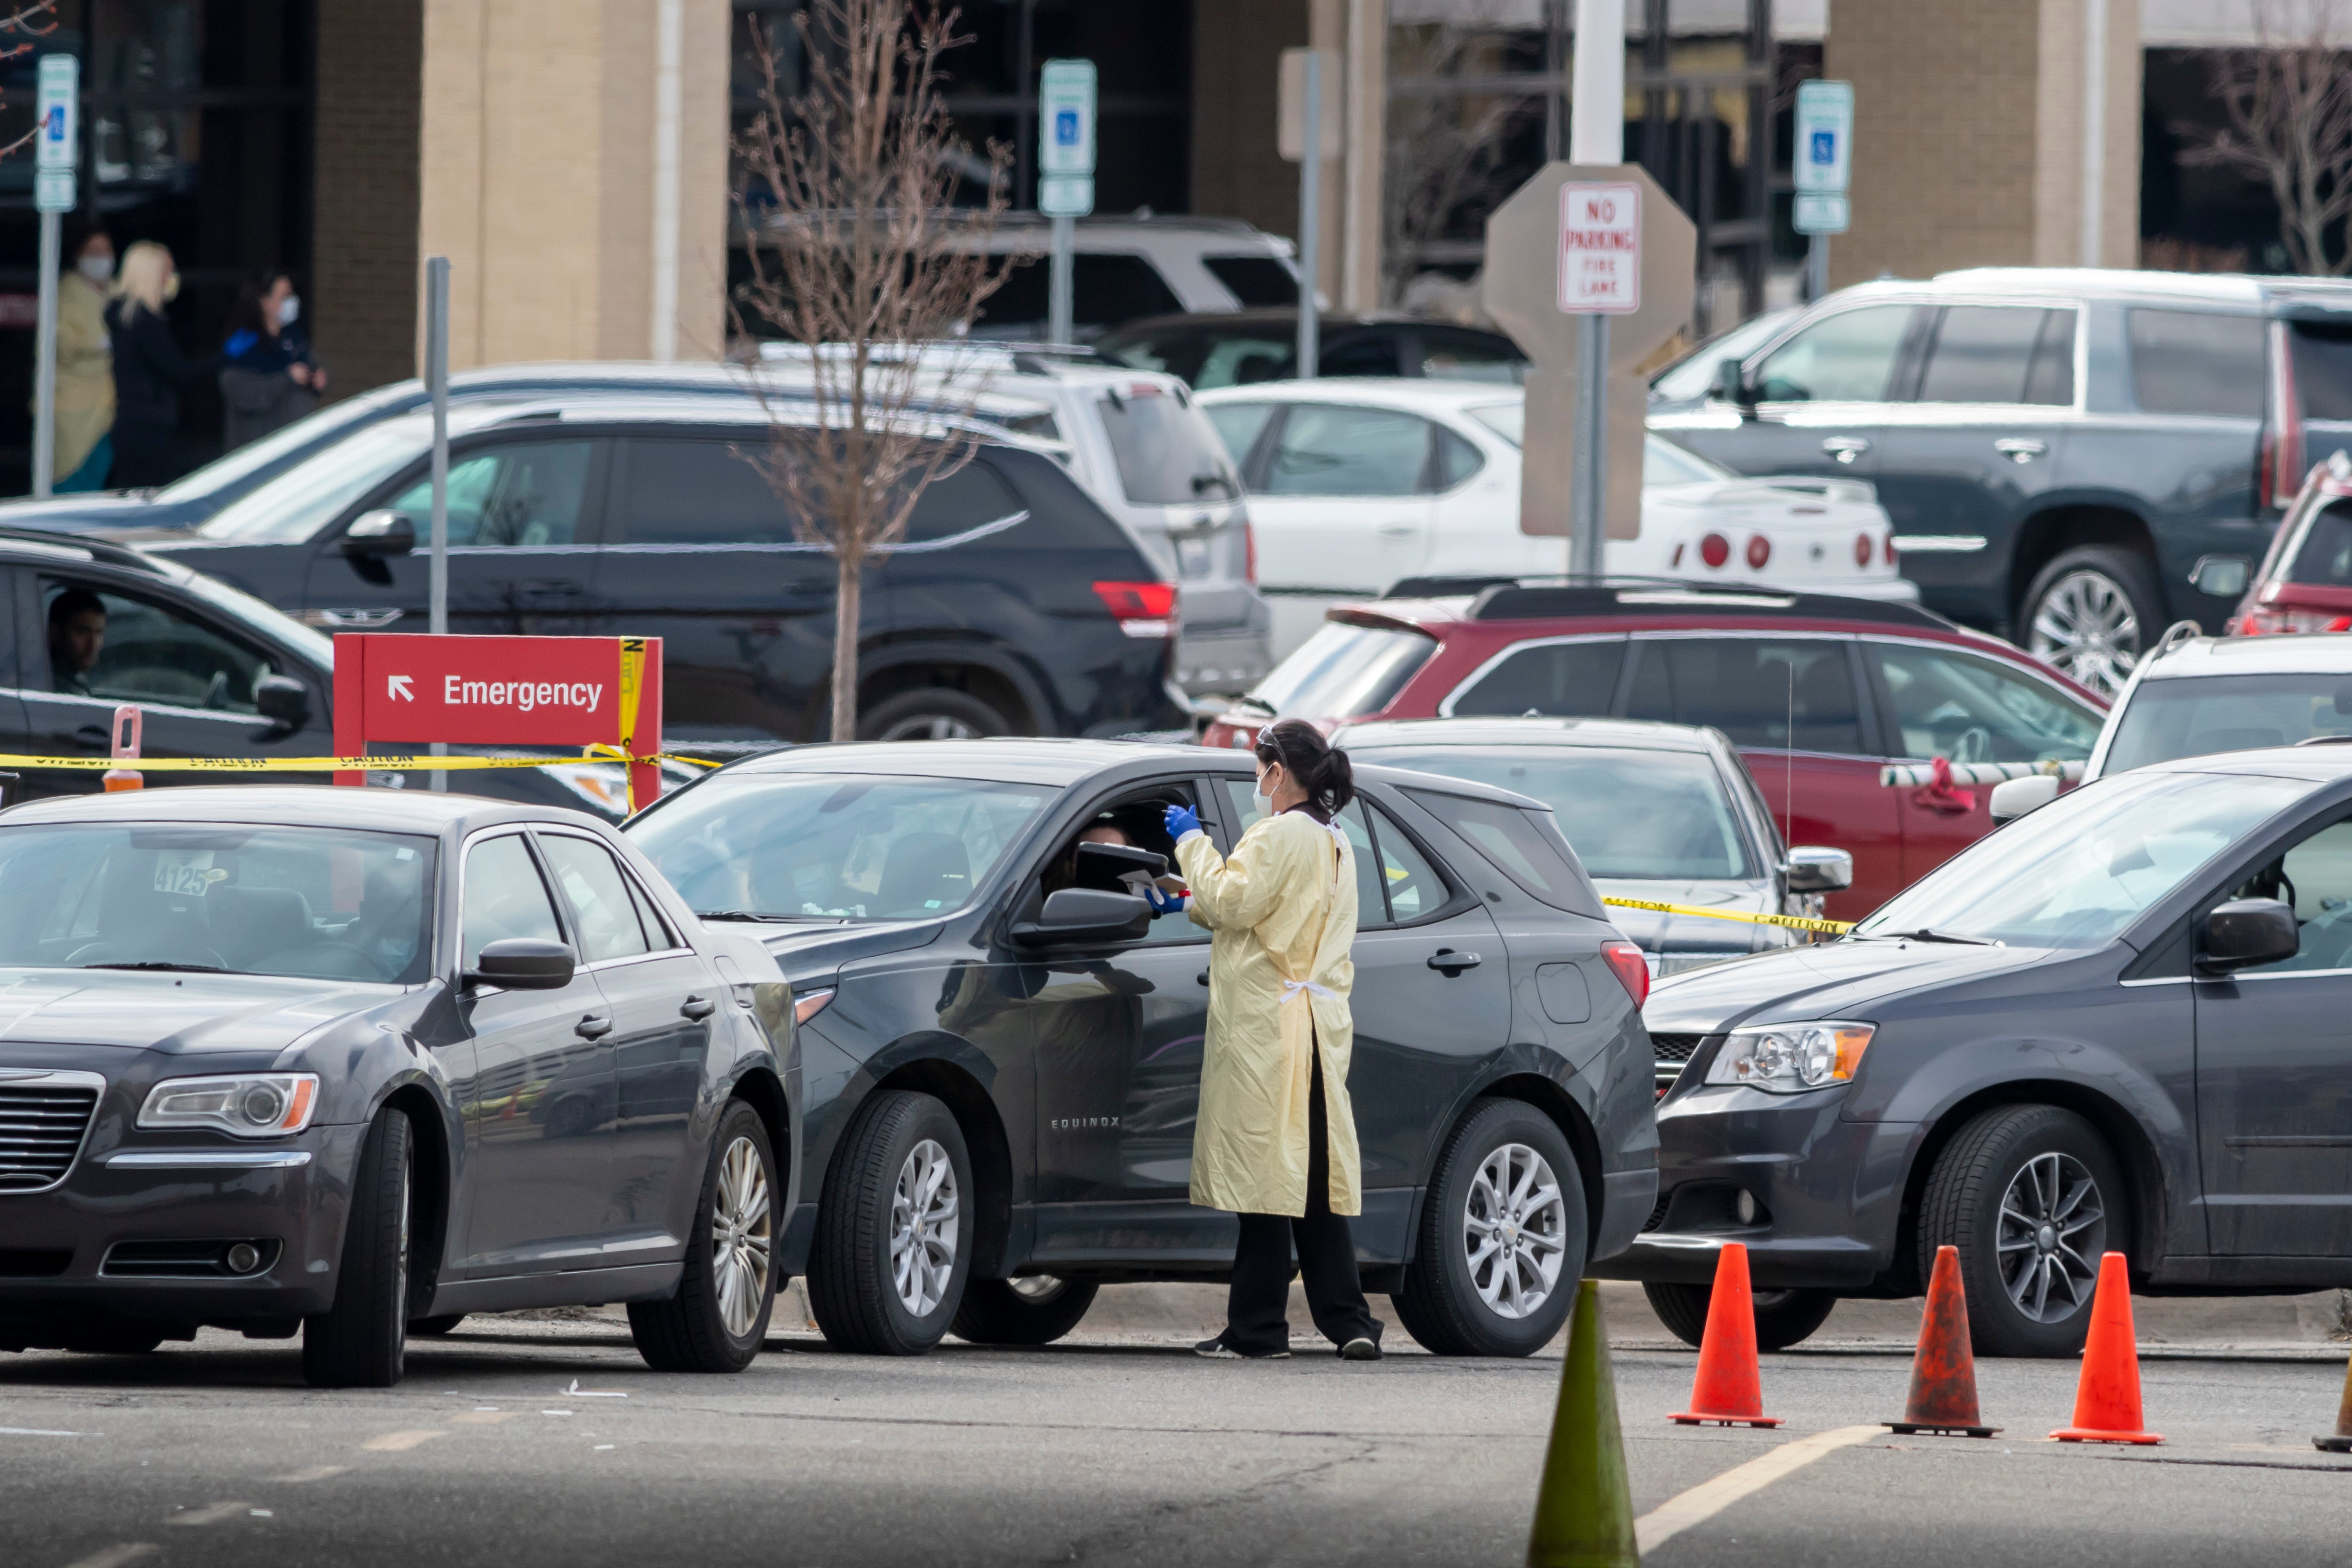 Patients are seen by medical staff during a drive-up screening process at Beaumont hospital in Royal Oak, March 16, 2020. Members of the public concerned that they may be infected with the coronavirus were able to get screening done from their vehicles.